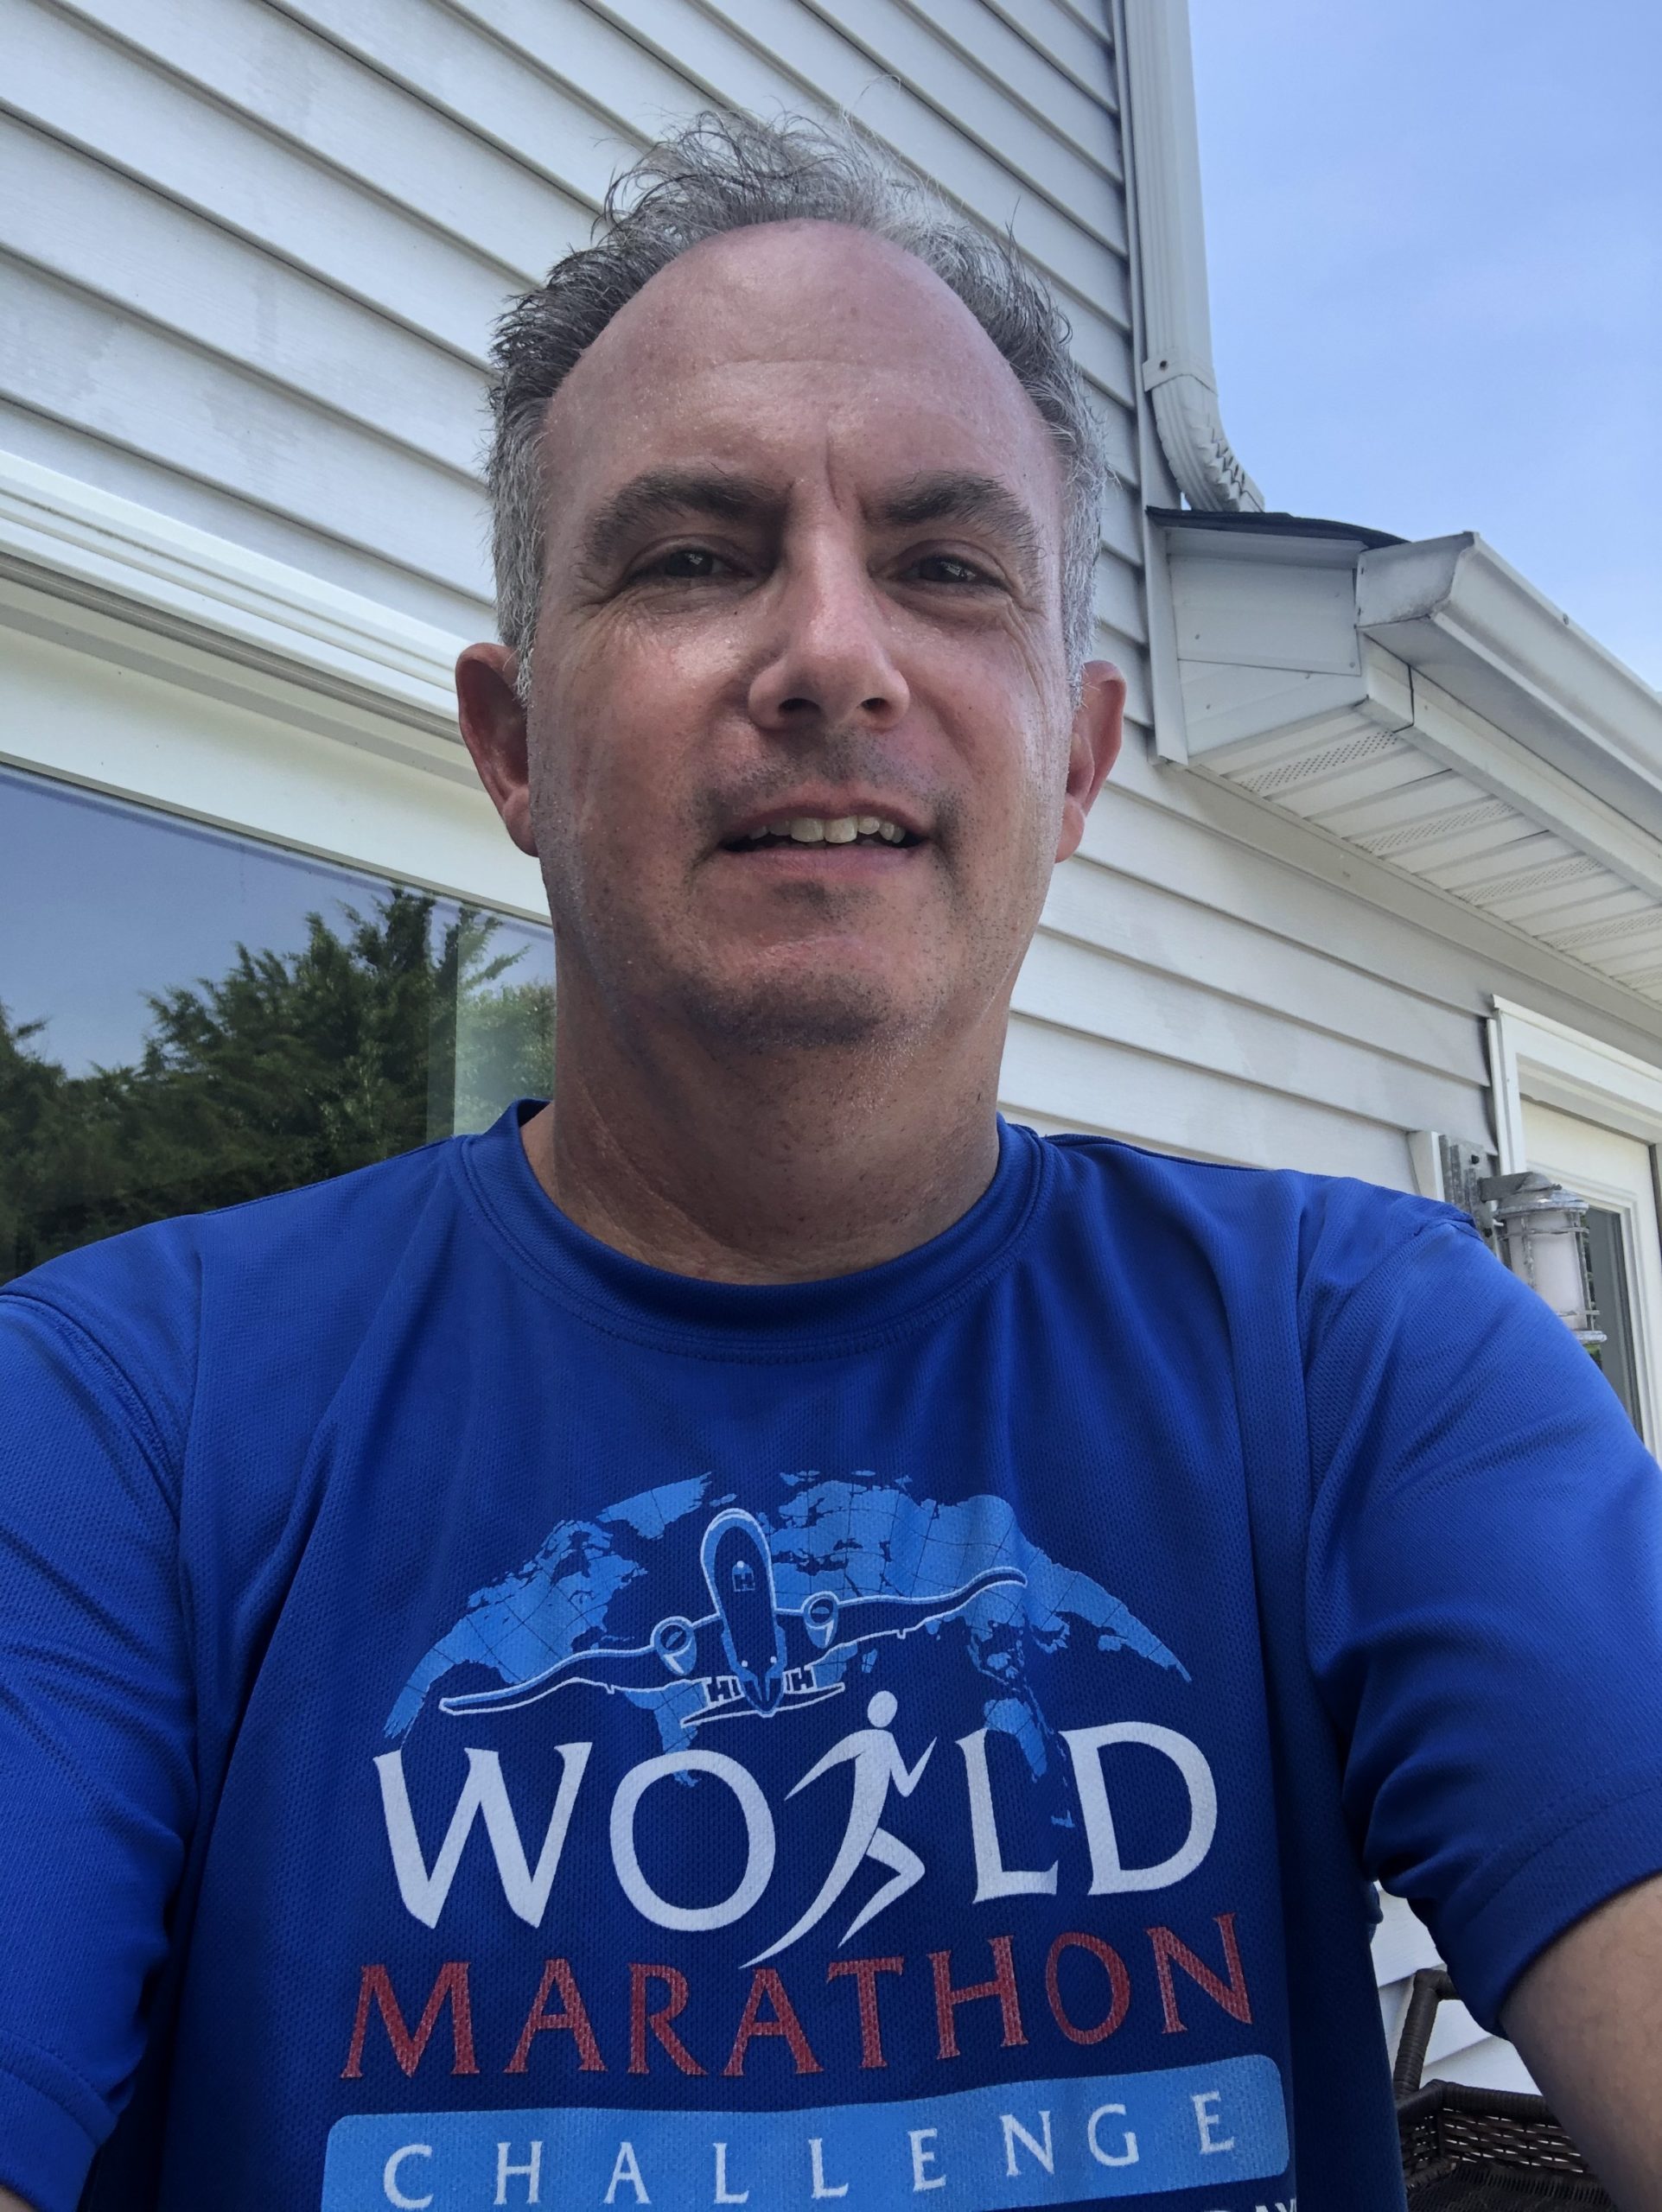 Bret Parker, who completes a physical feat every year to raise money for Parkinson's disease research, challenged himself with the Calendar Club in July 2020.